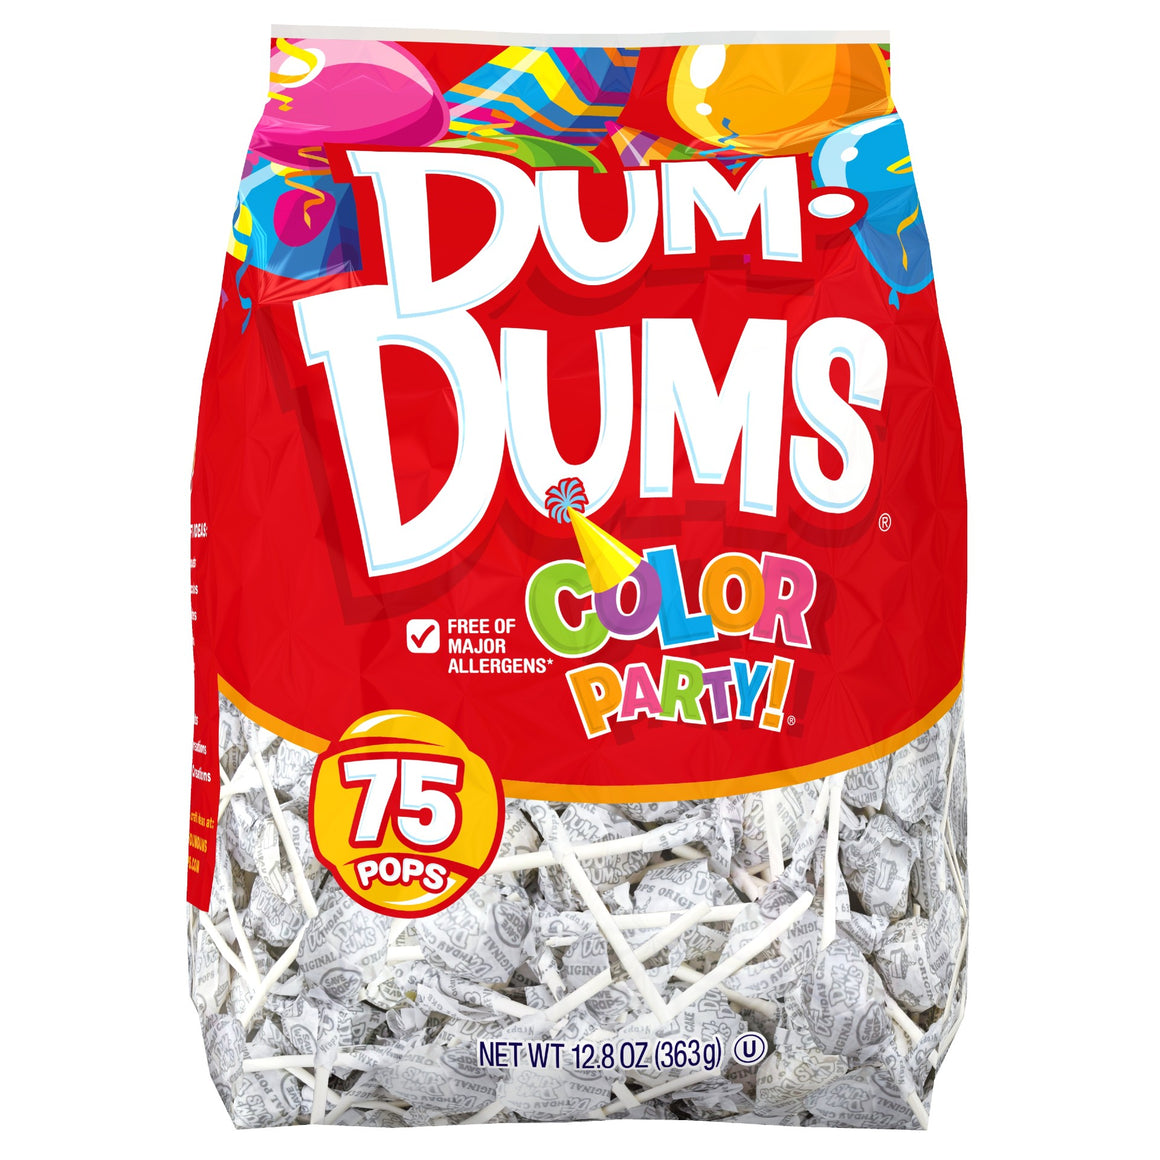 All City Candy Dum Dums Color Party White Birthday Cake Lollipops - Bag of 75 Lollipops & Suckers Spangler For fresh candy and great service, visit www.allcitycandy.com